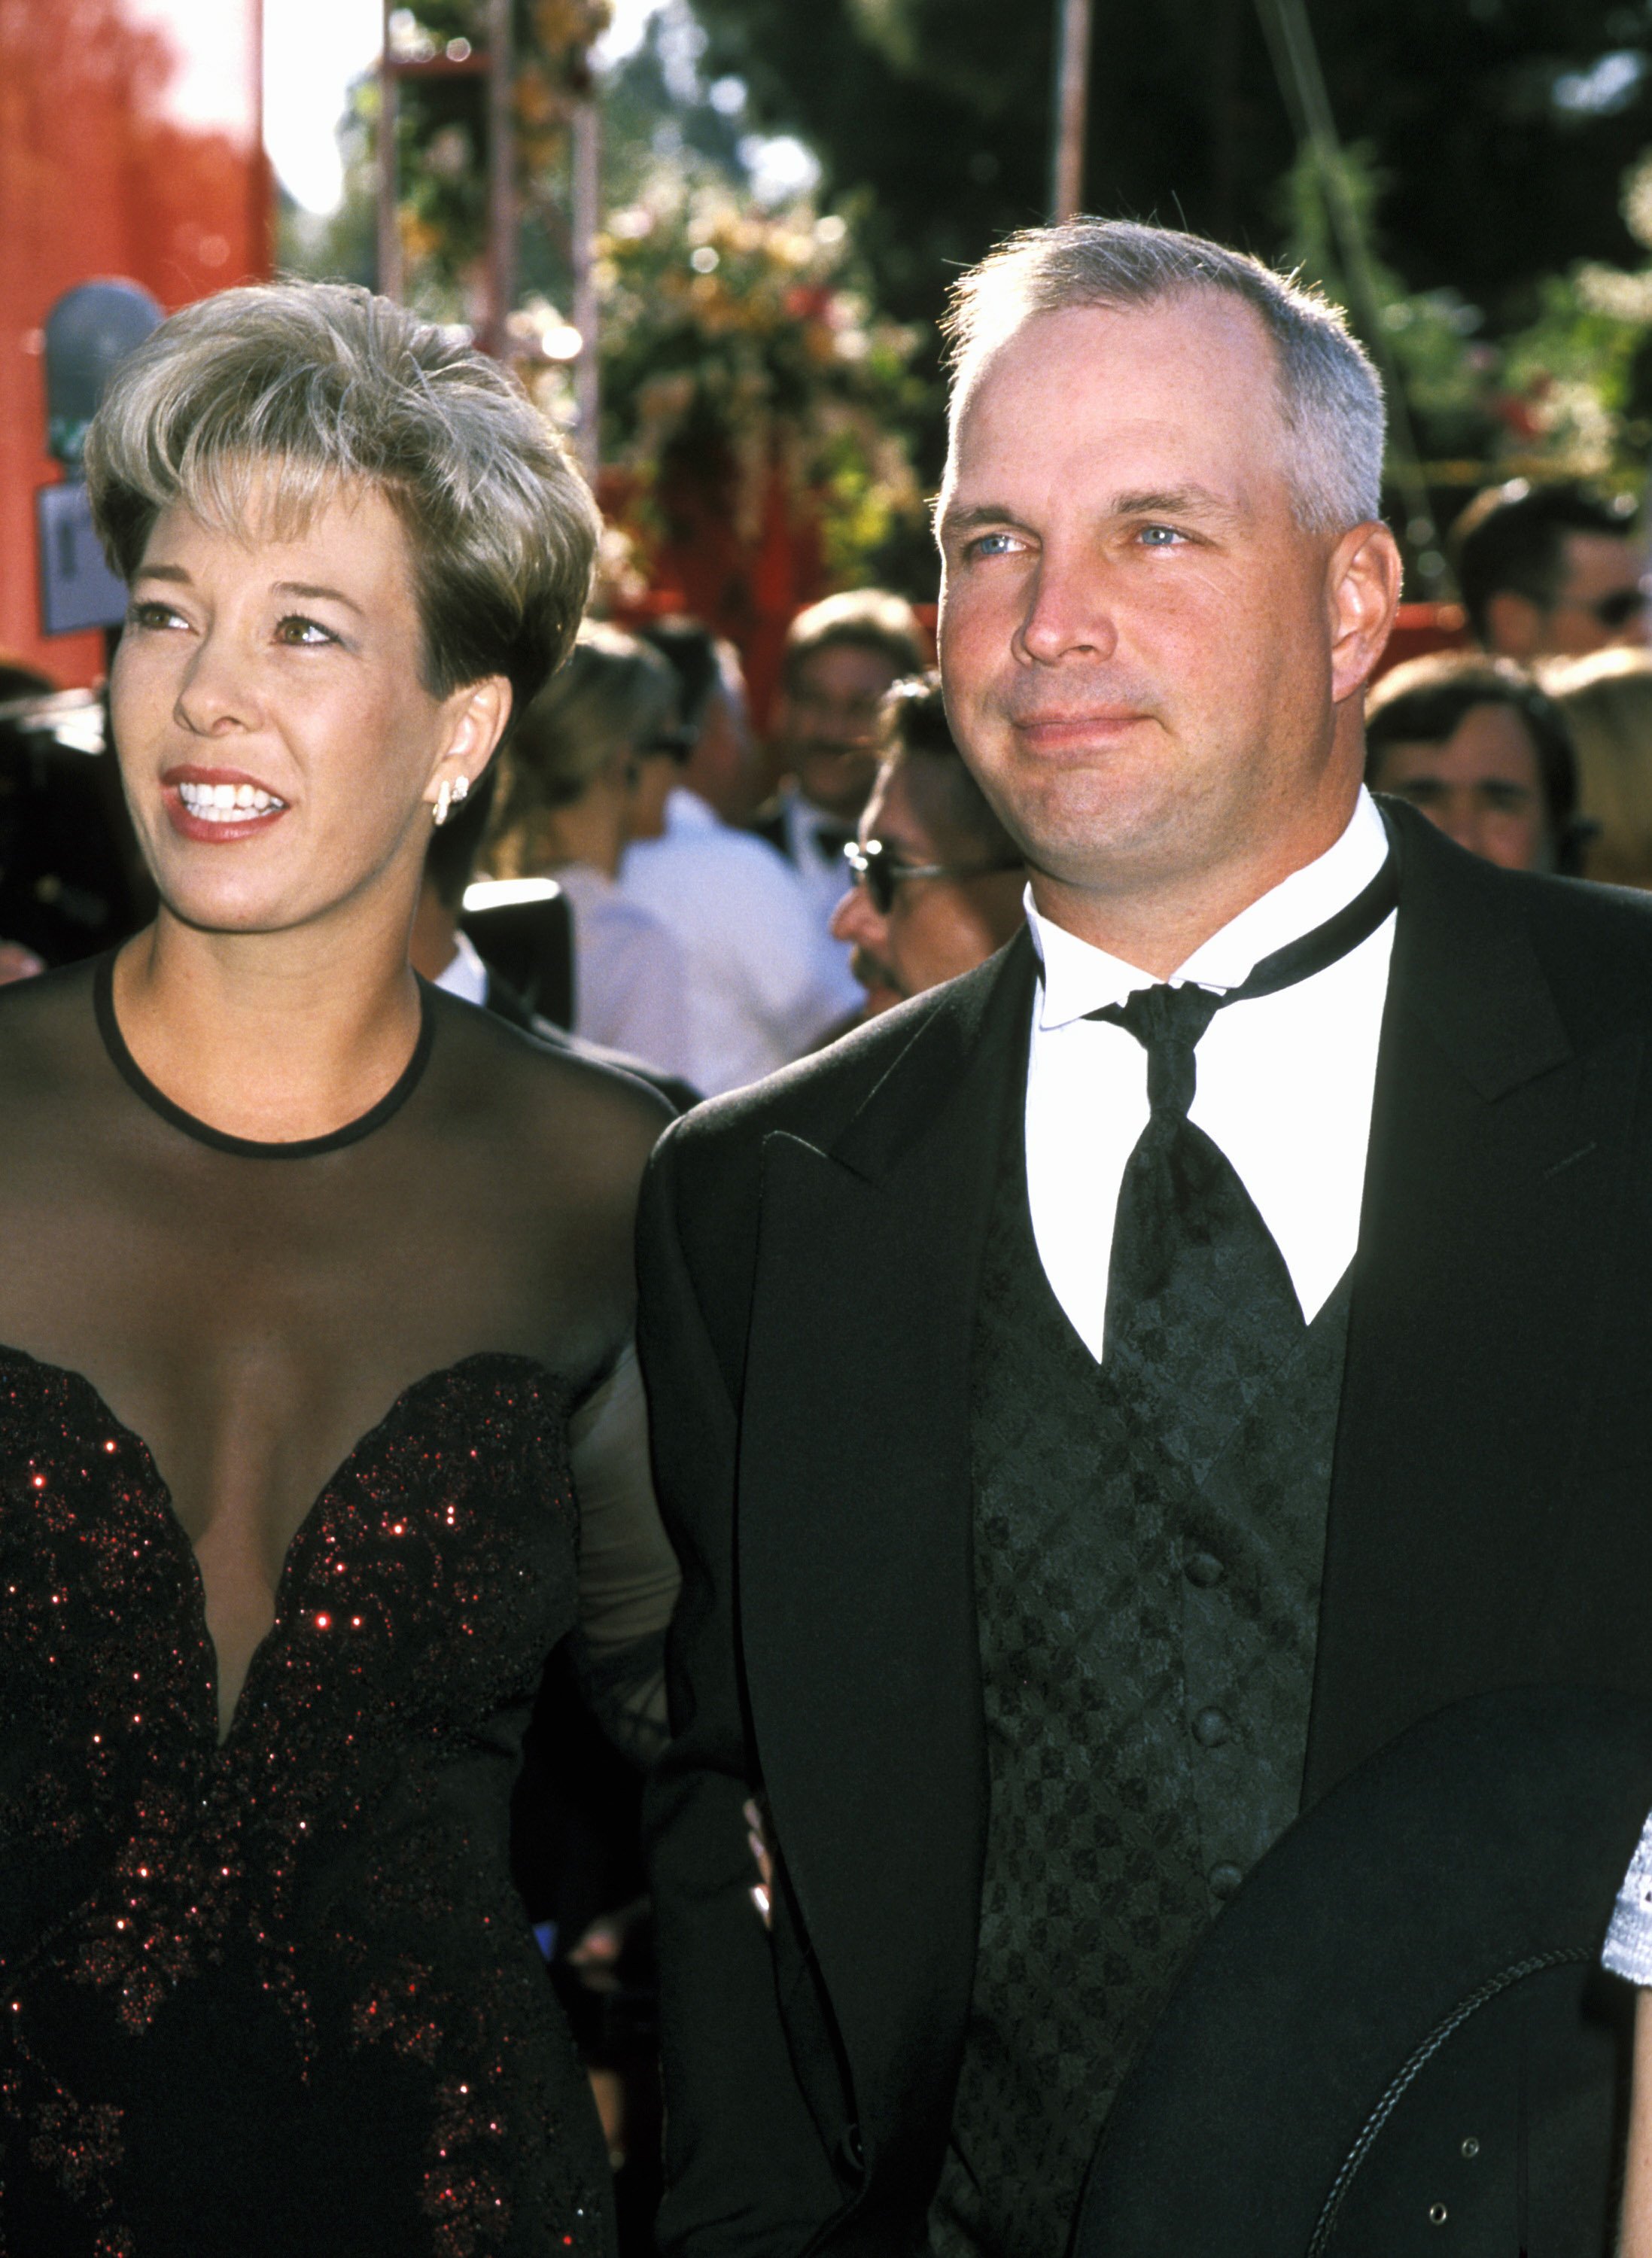 Garth Brooks with wife Sandy Mahl smiling together at the Academy Awards